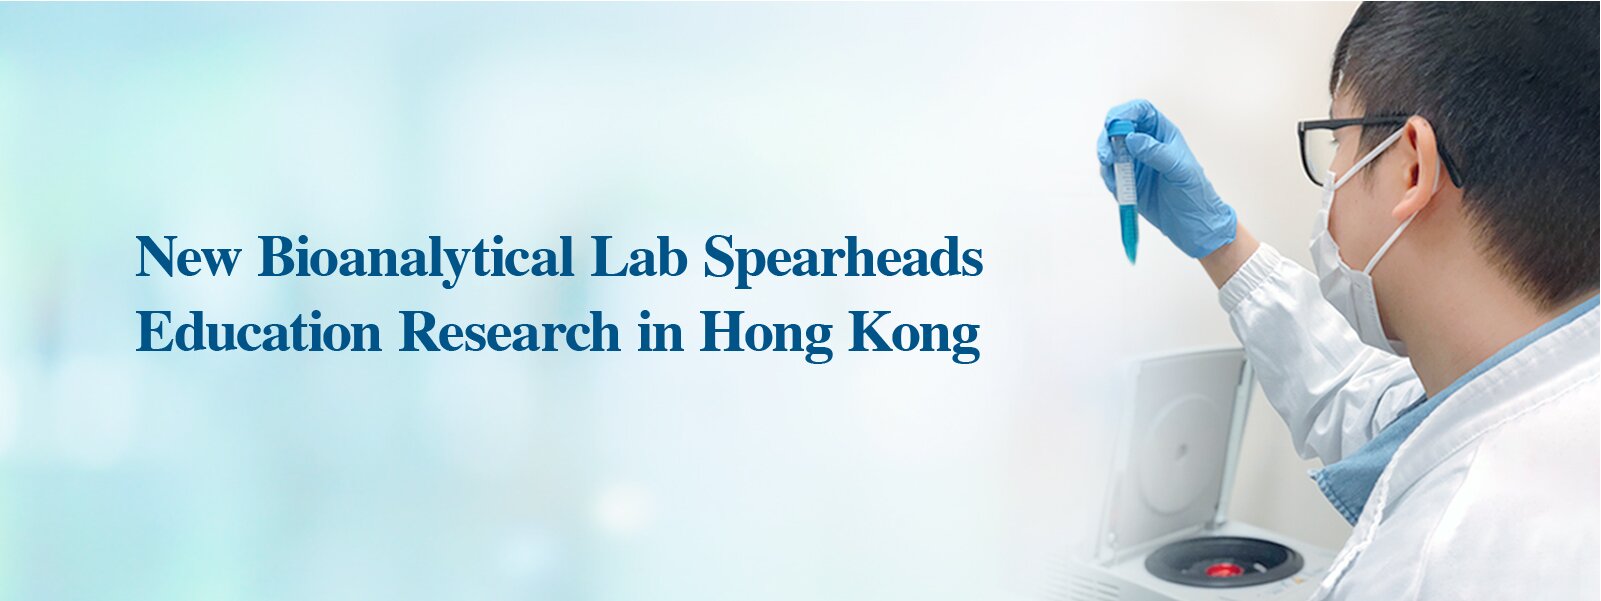 New Bioanalytical Lab Spearheads Education Research in Hong Kong